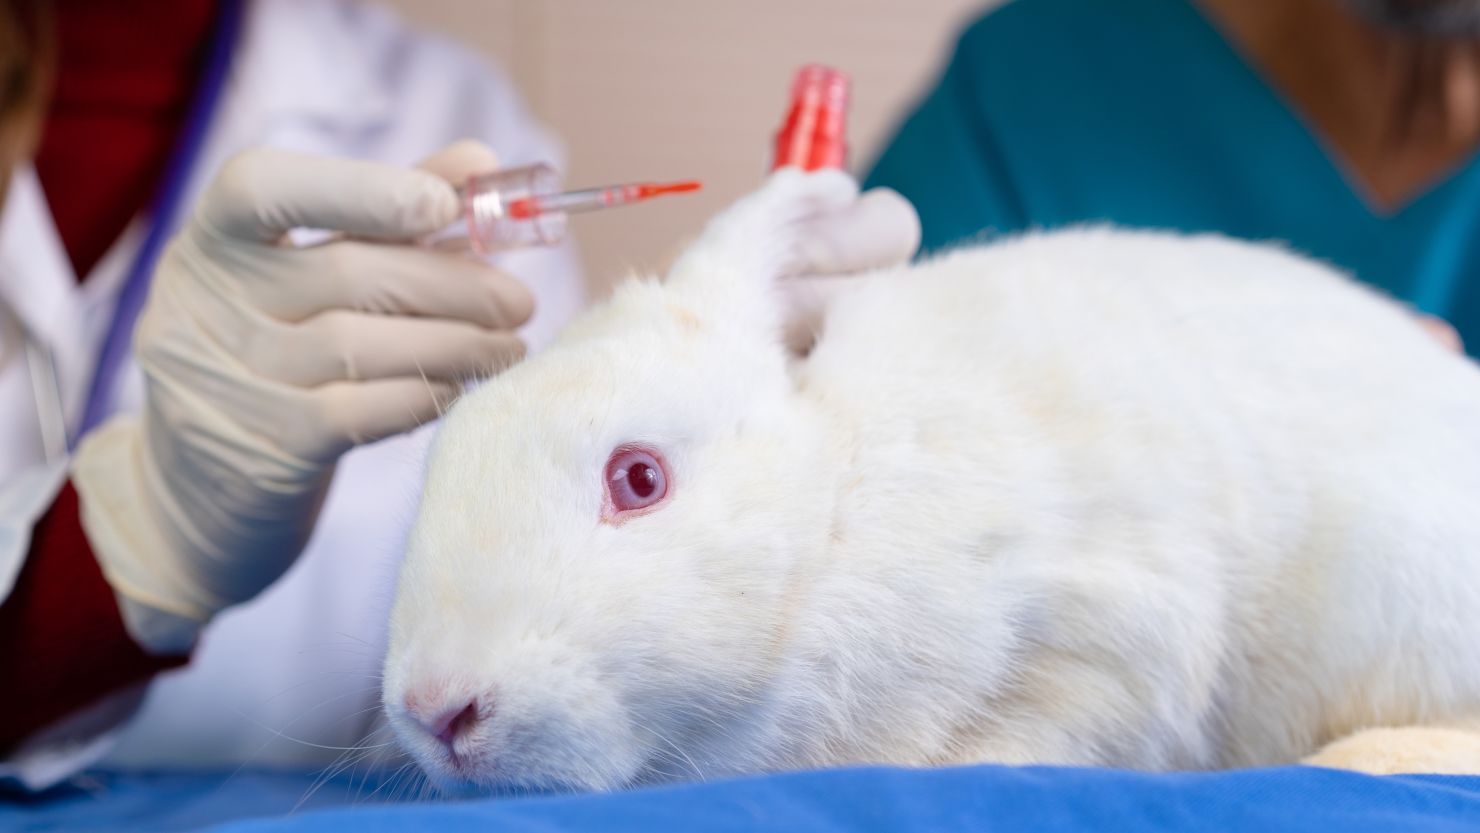 Canada has joined more than 40 countries to ban cosmetic testing on animals.